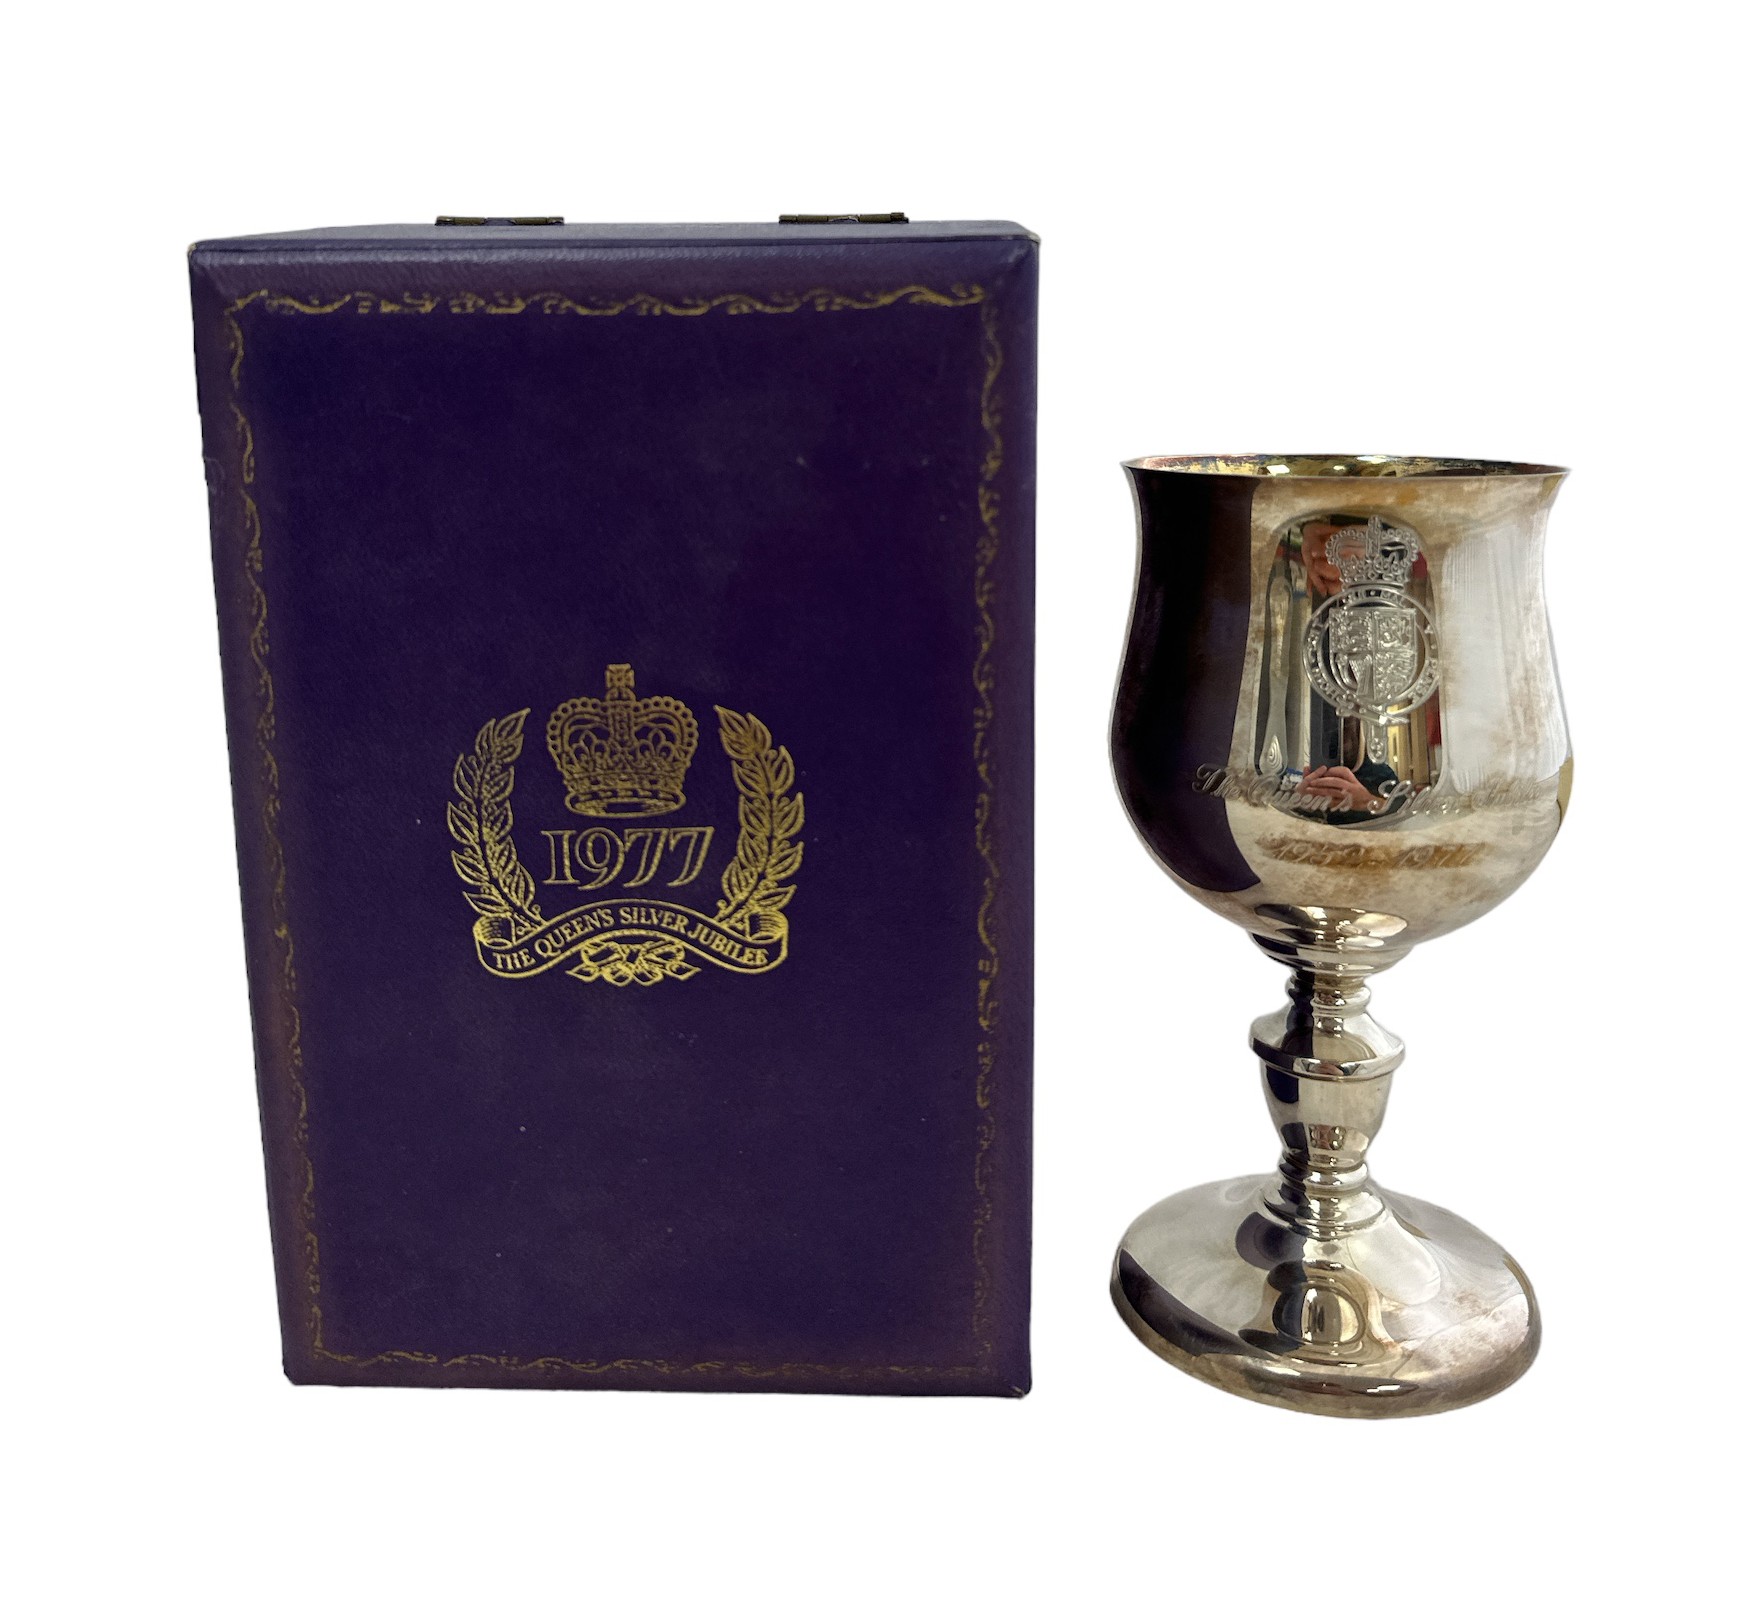 Queens Silver Jubilee silver goblet by A.T Cannon Ltd Birmingham, limited edition no.256 of 1,000,